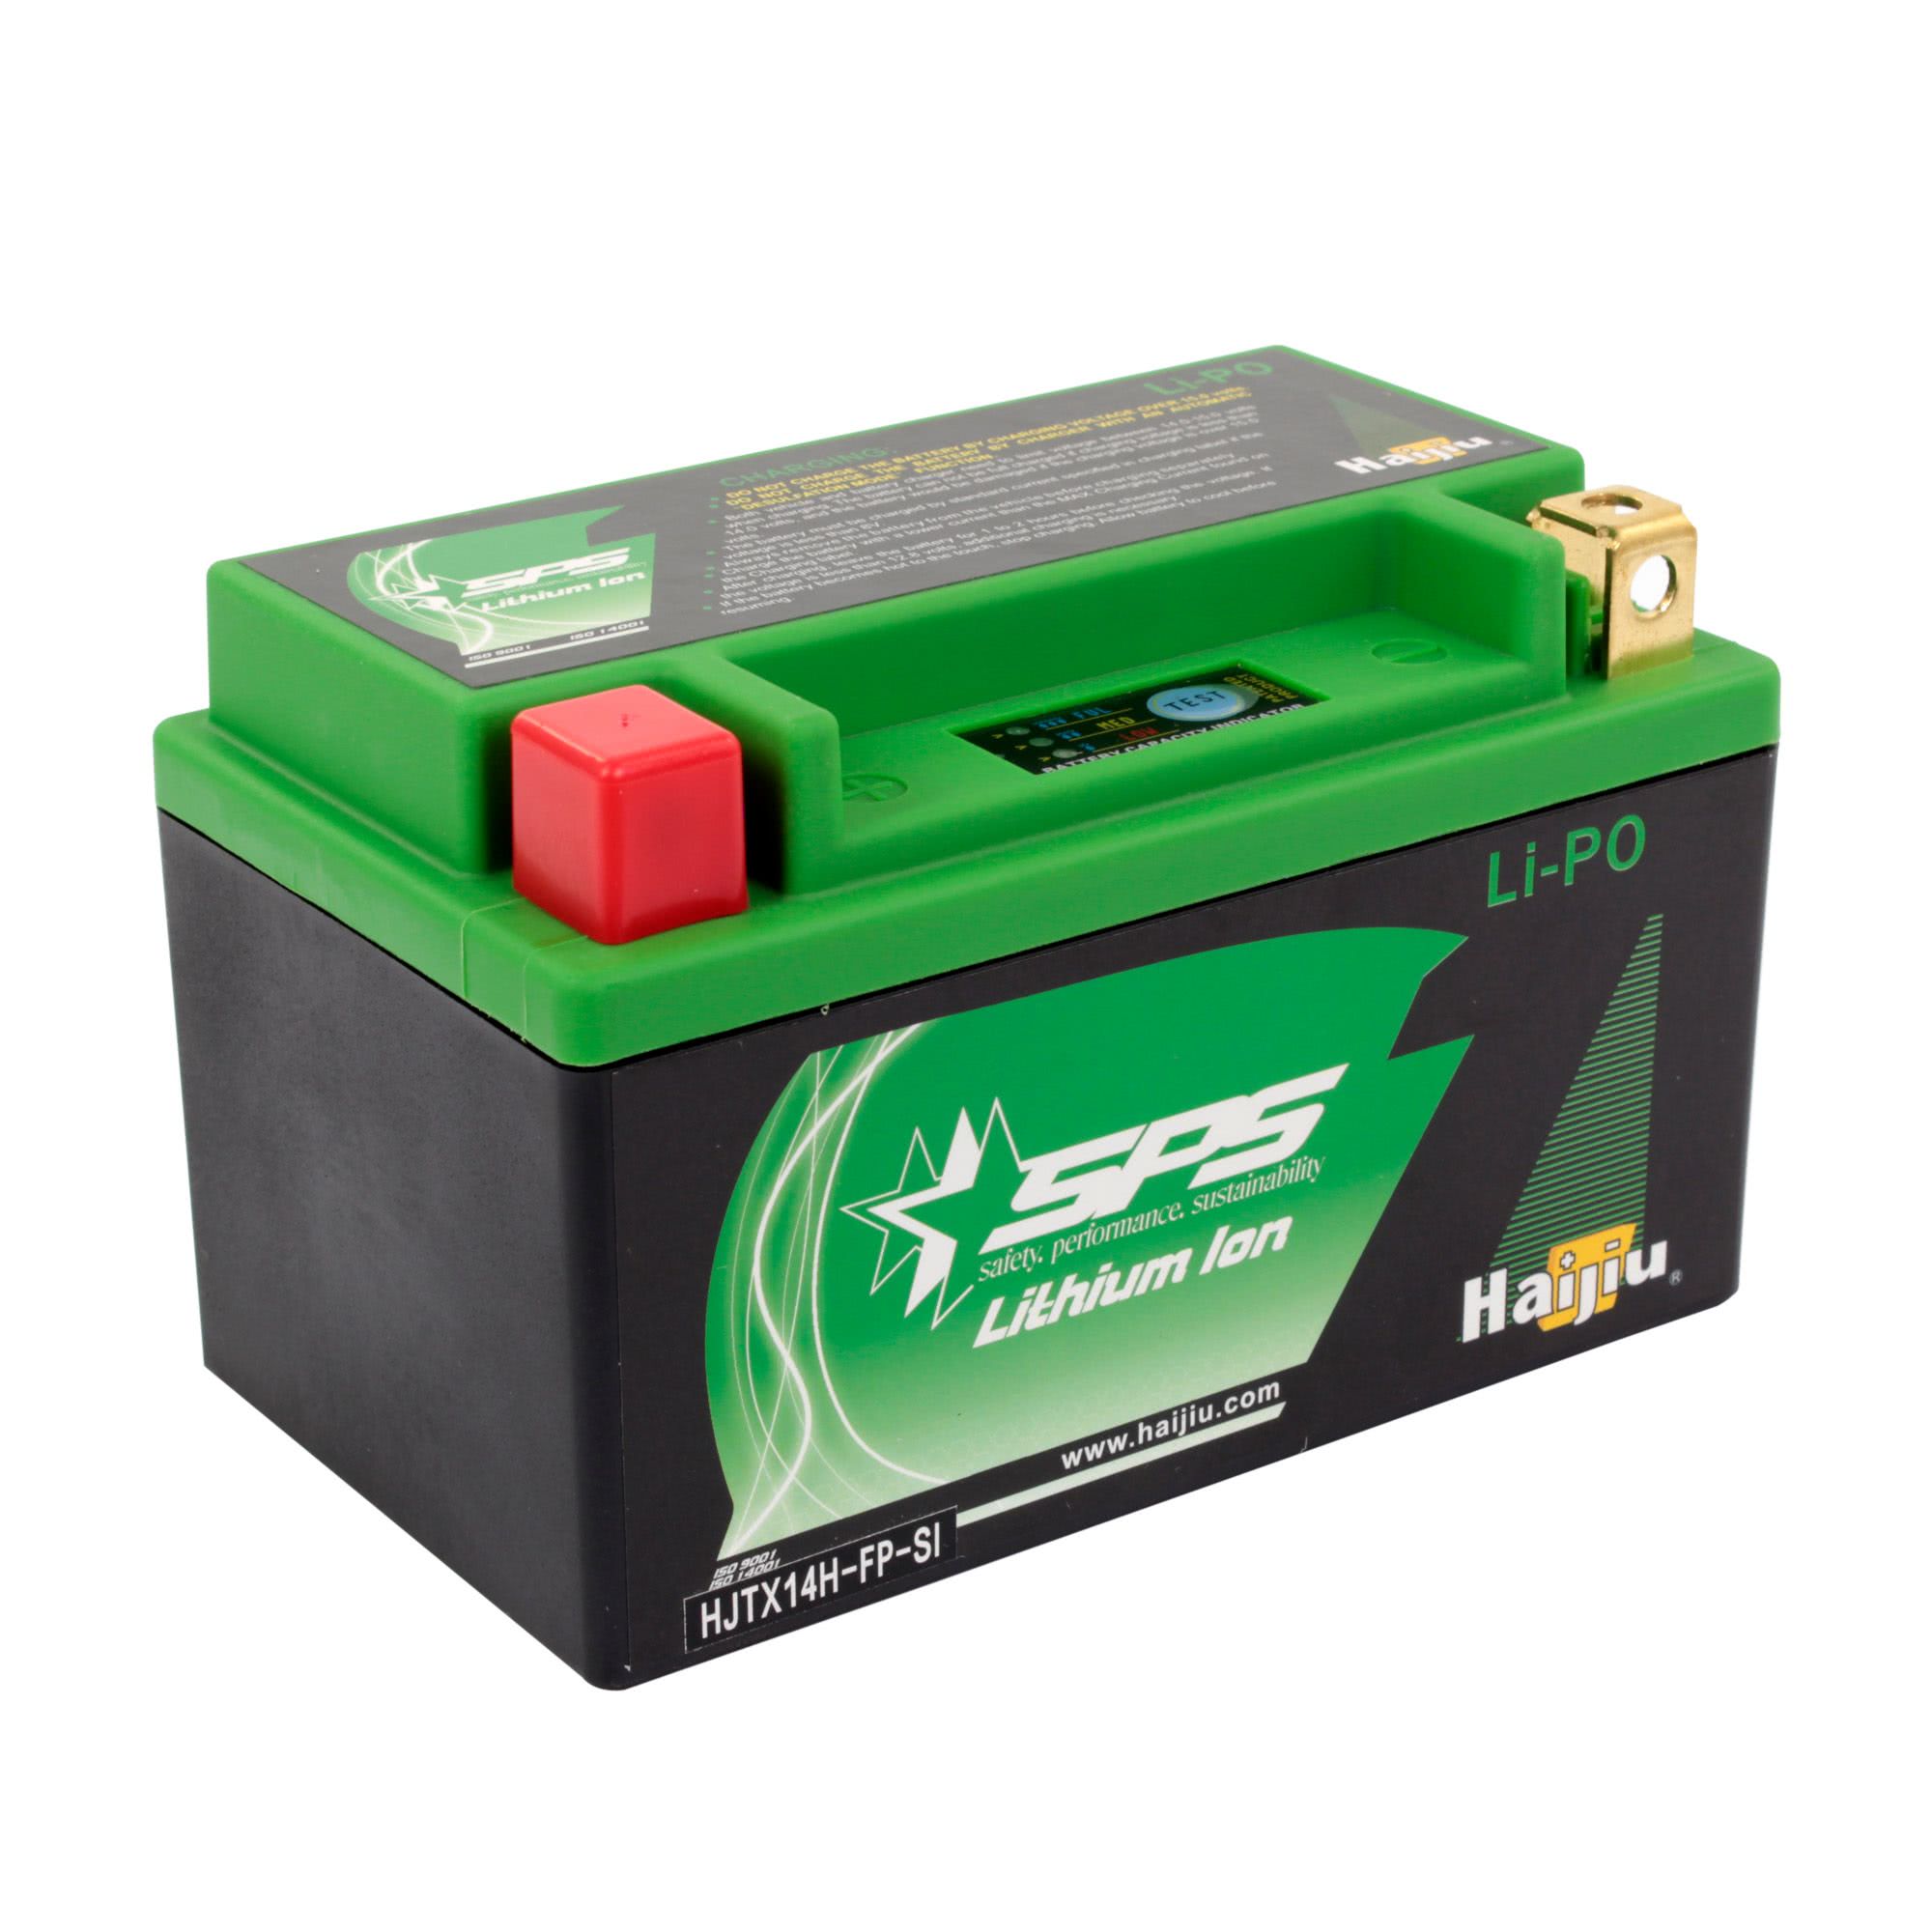 More Choice More Savings Jmt Hjtx14h Fp Si Lithium Ion Battery Ytx12bs